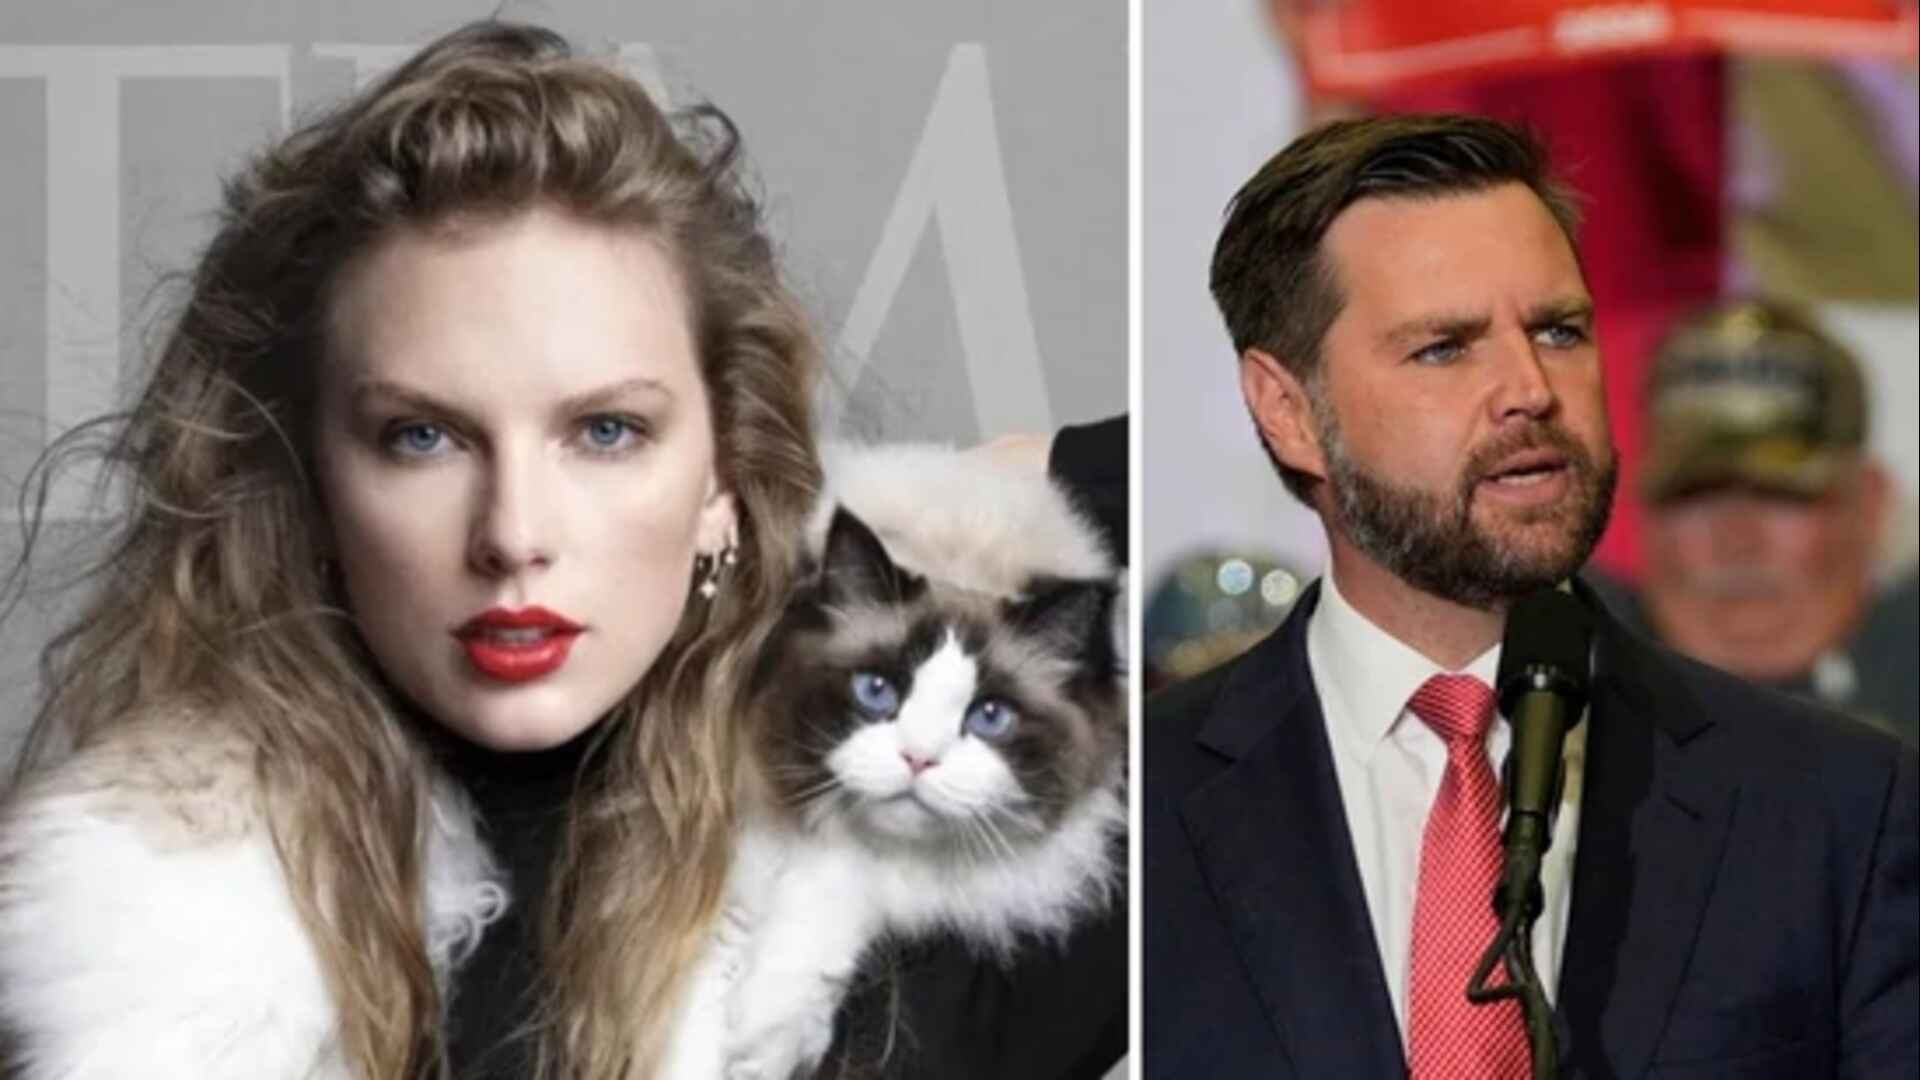 JD Vance Sparks Swifties’ Outrage with Remarks on ‘Childless Cat Ladies’